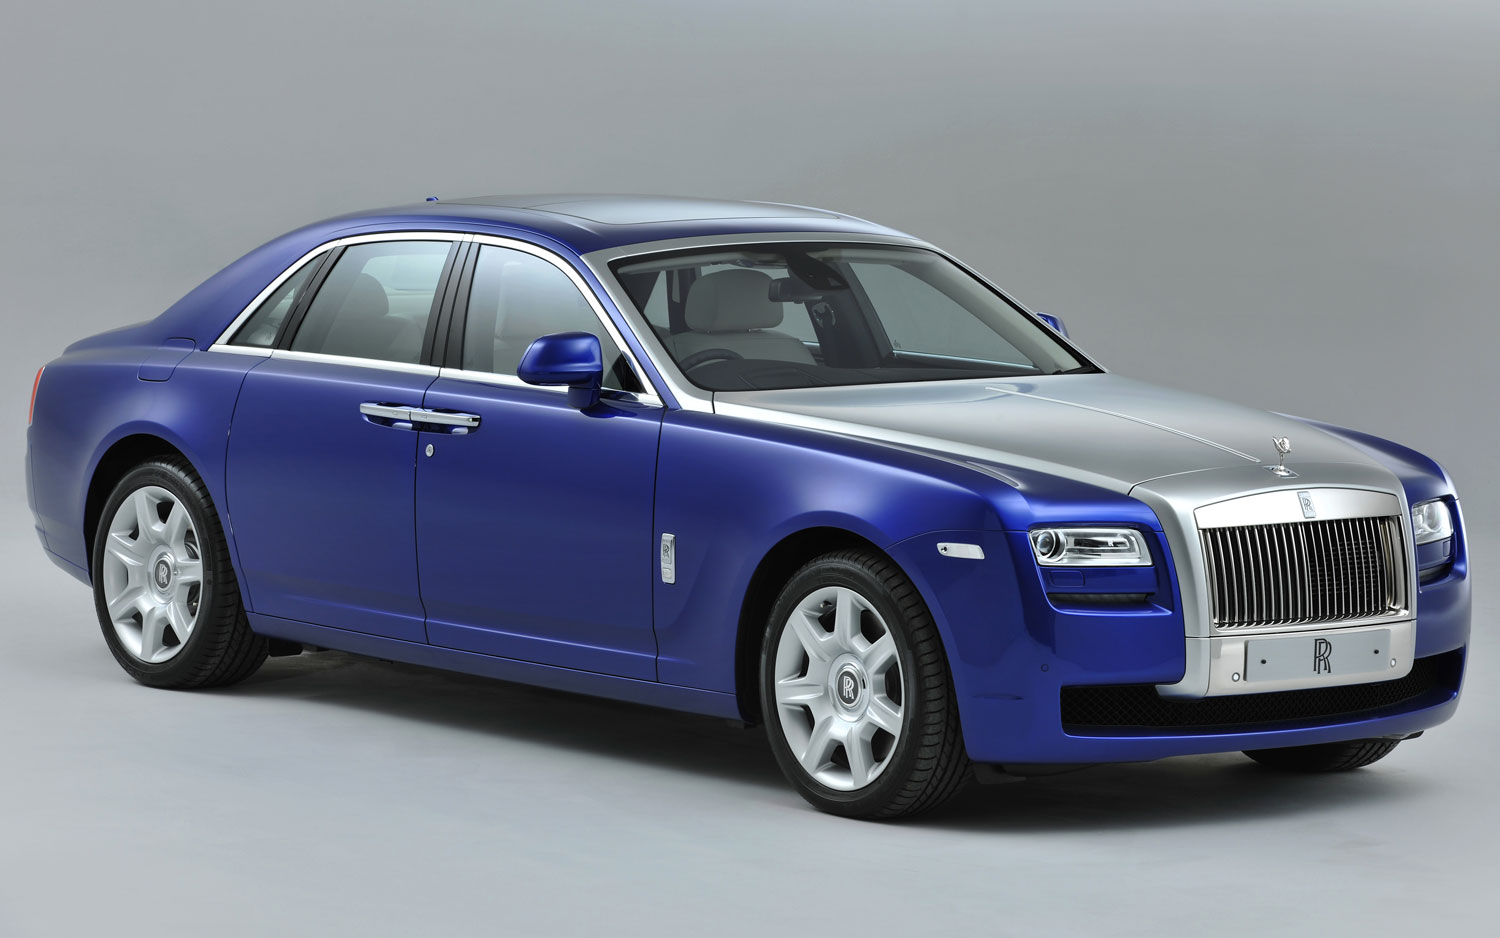 2013 Rolls-Royce Ghost Revealed, Changes are Spookily Subtle